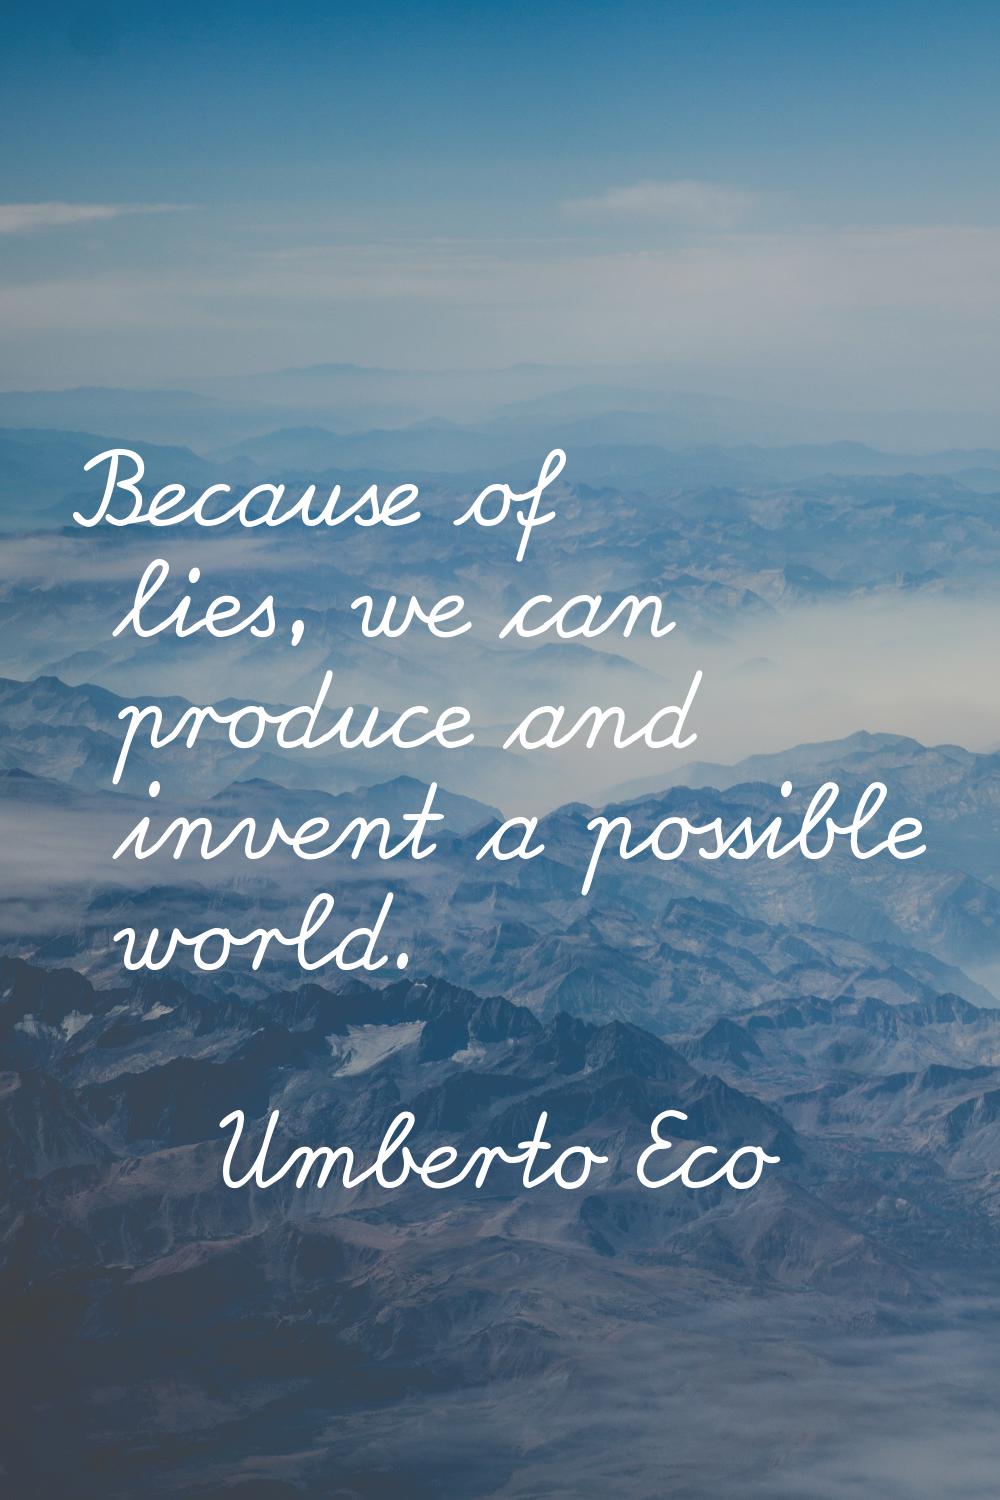 Because of lies, we can produce and invent a possible world.